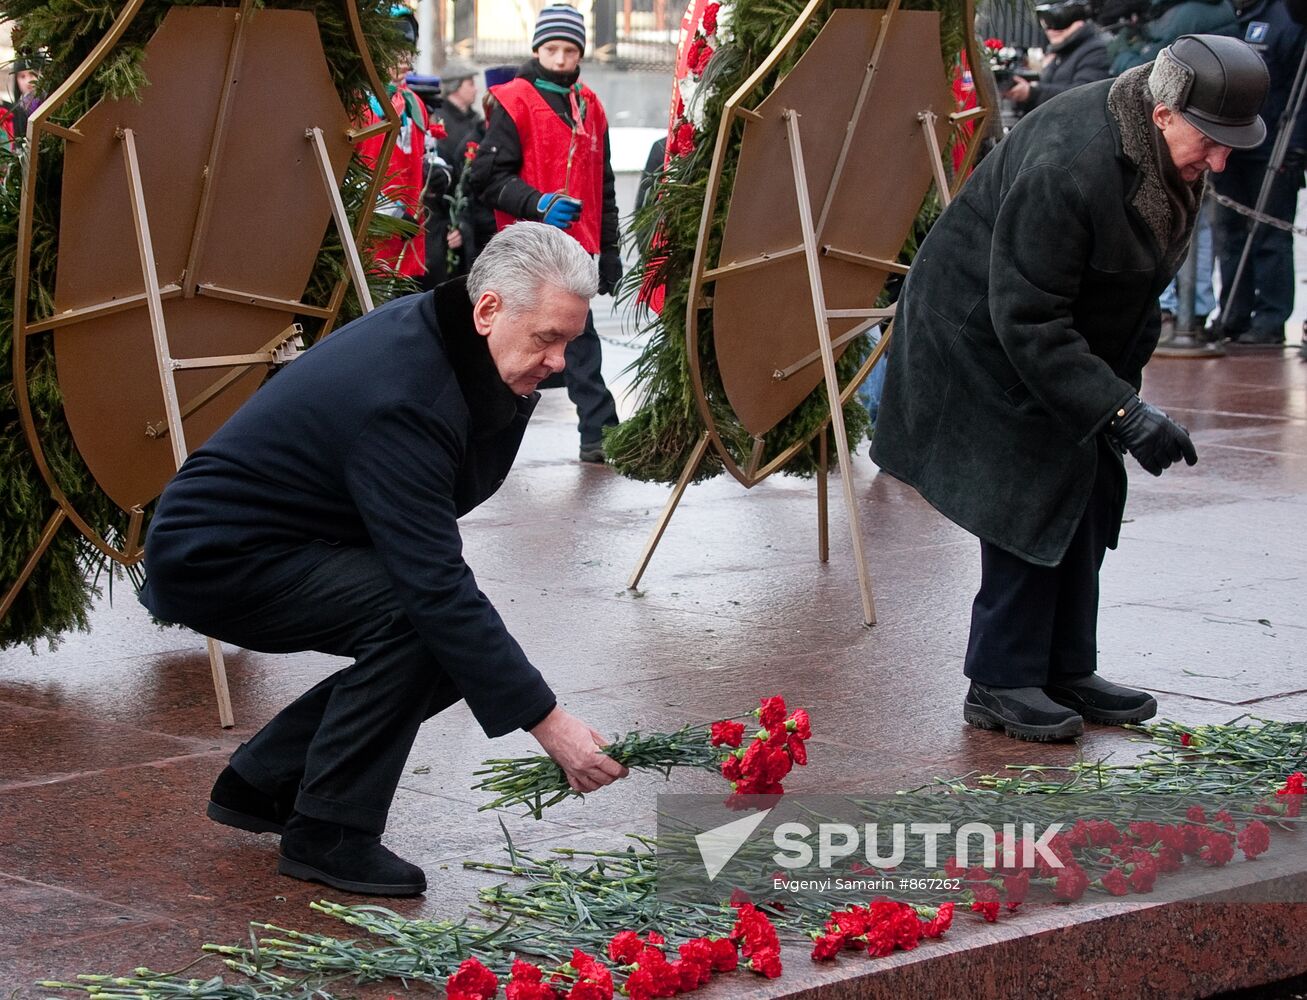 Sergei Sobyanin lays flowers at Tomb of Unknown Soldier